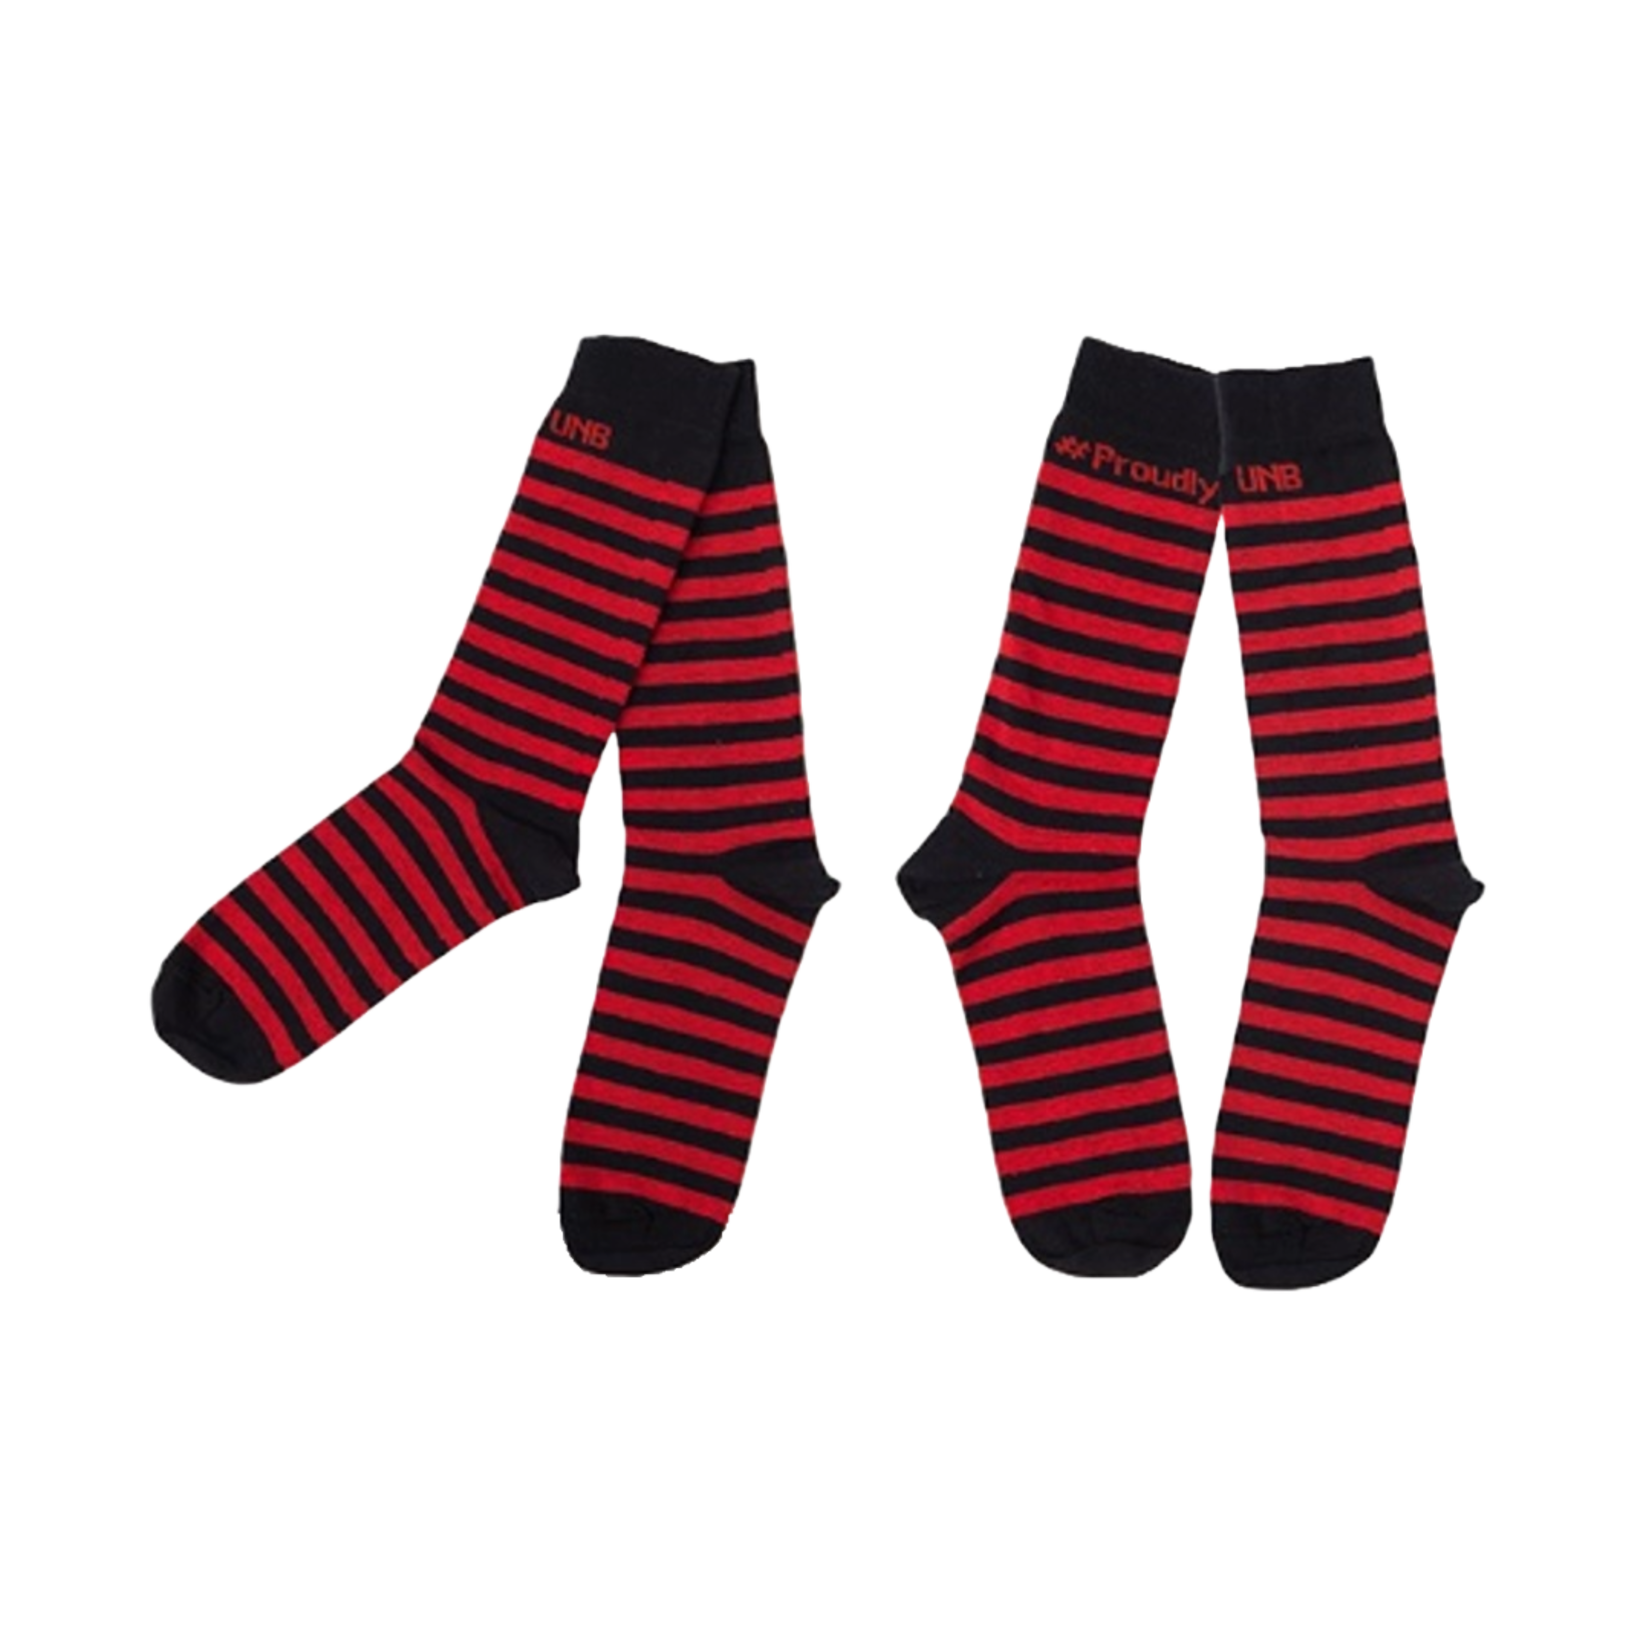 Proudly UNB Proudly UNB Black/Red Striped Socks